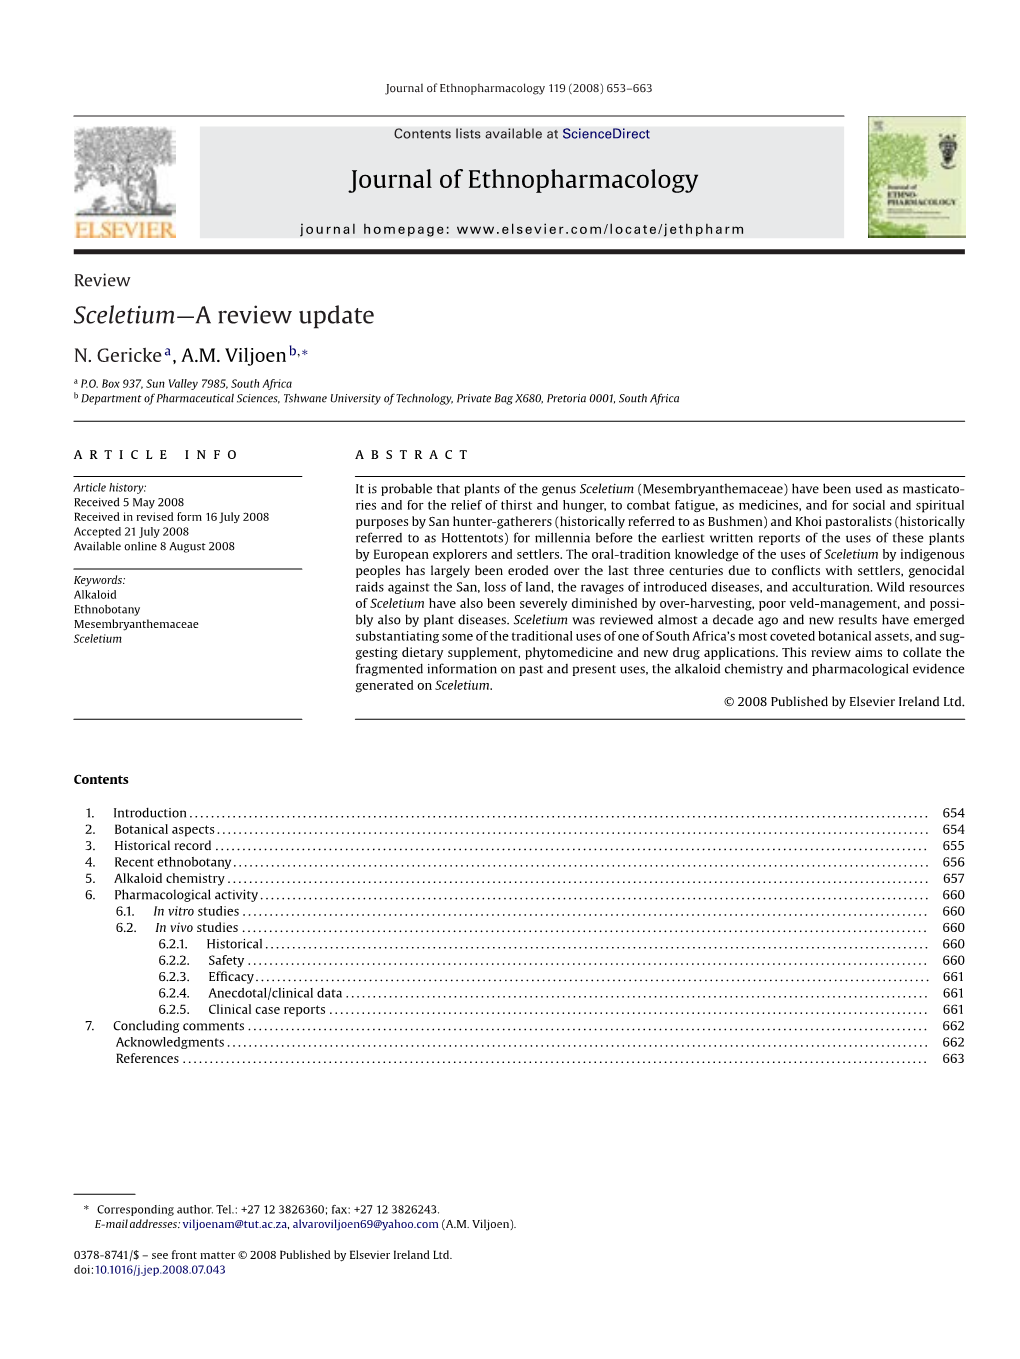 Journal of Ethnopharmacology Sceletium—A Review Update